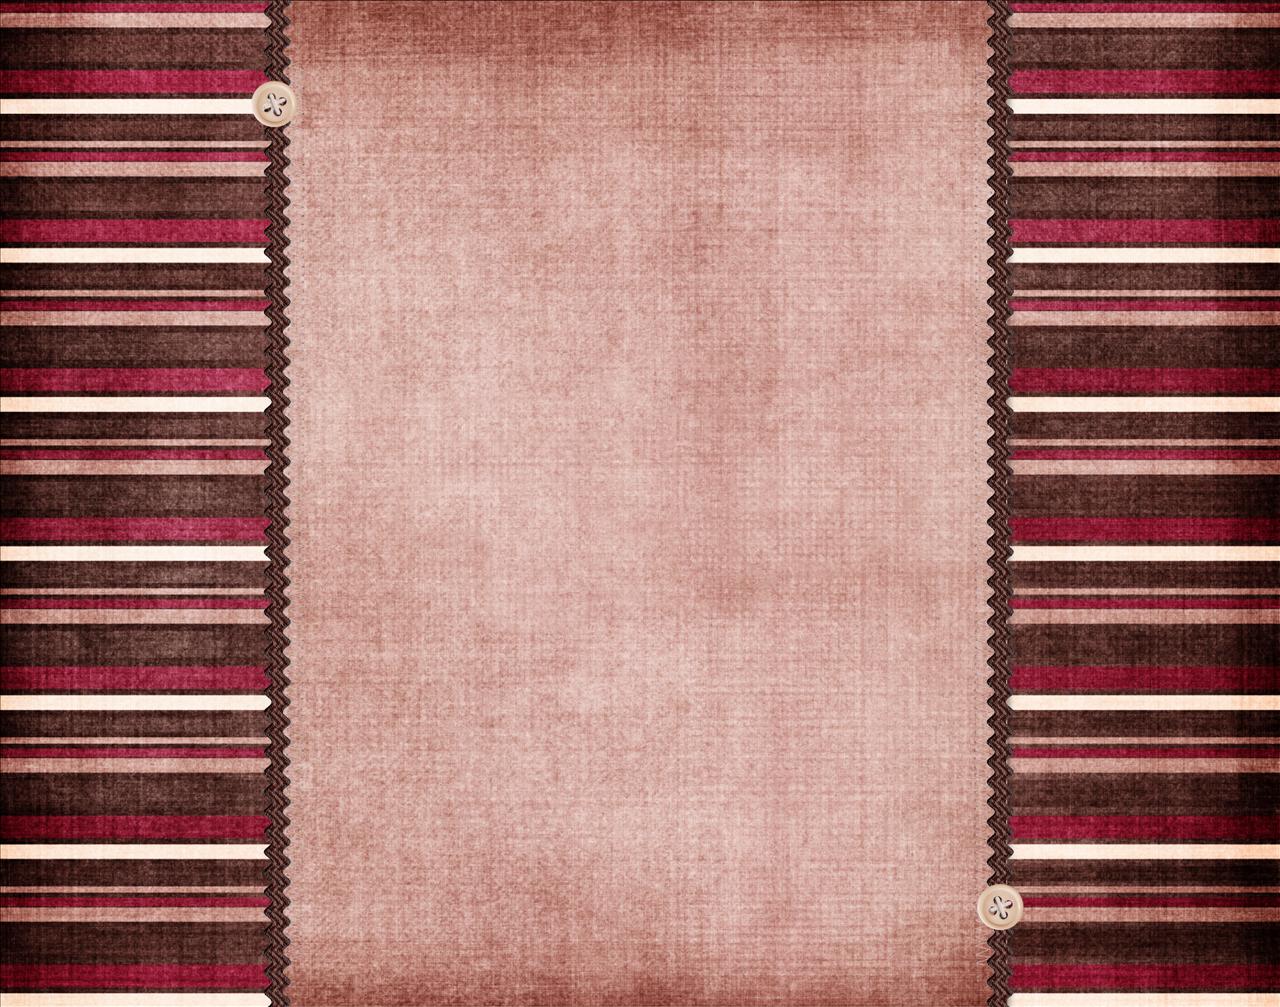 Pink with Stripes Backgrounds